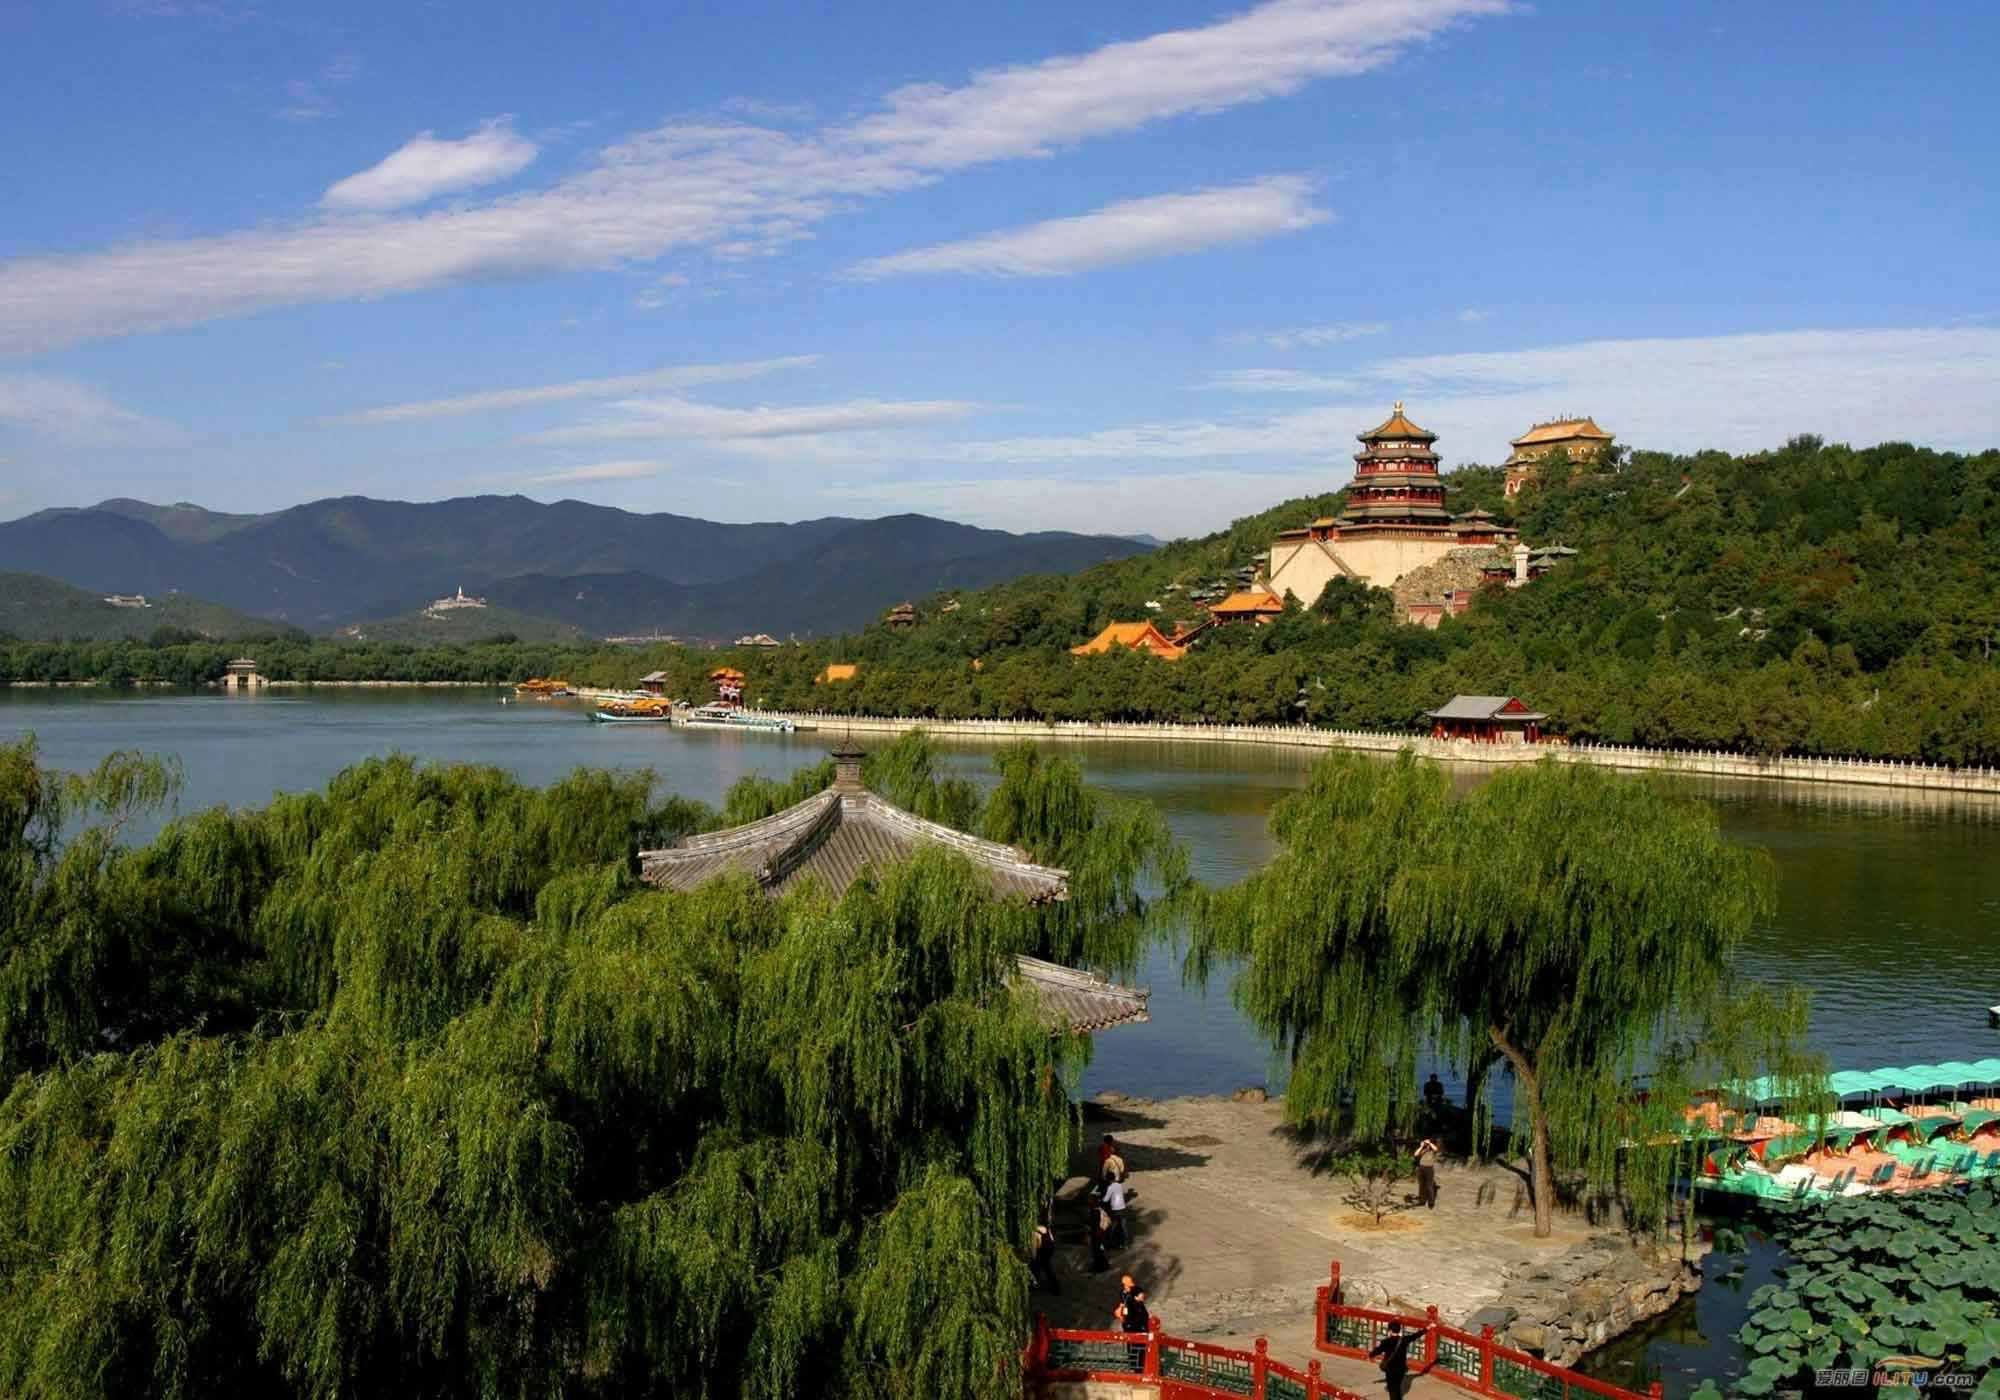 Beijing private tour of Badaling Great Wall and Summer Palace in Musement